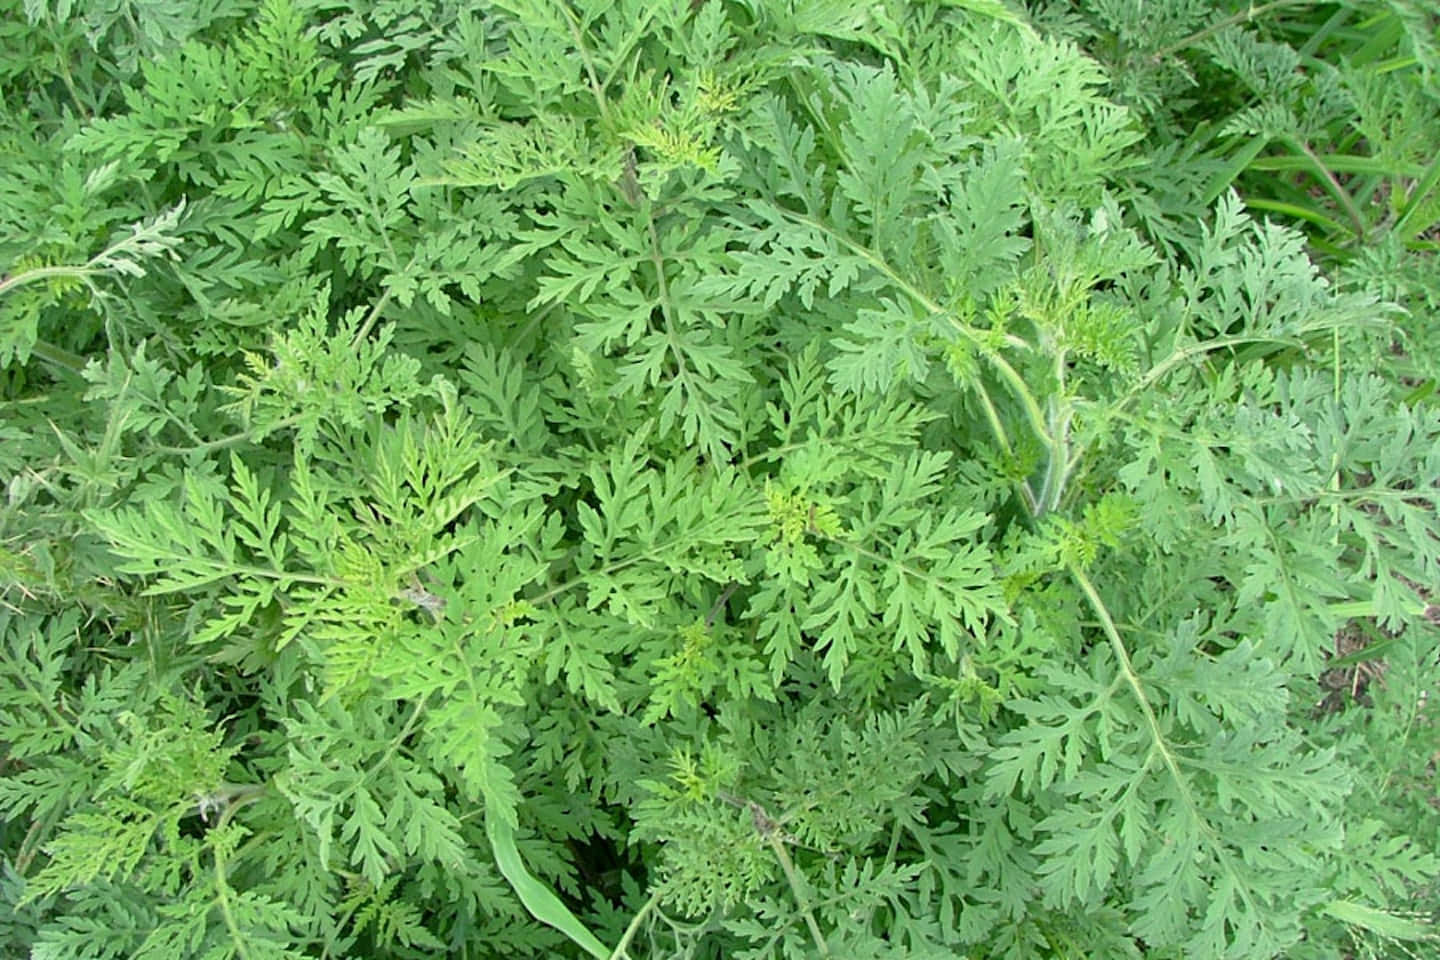 Blooming Ragweed and its Pollen